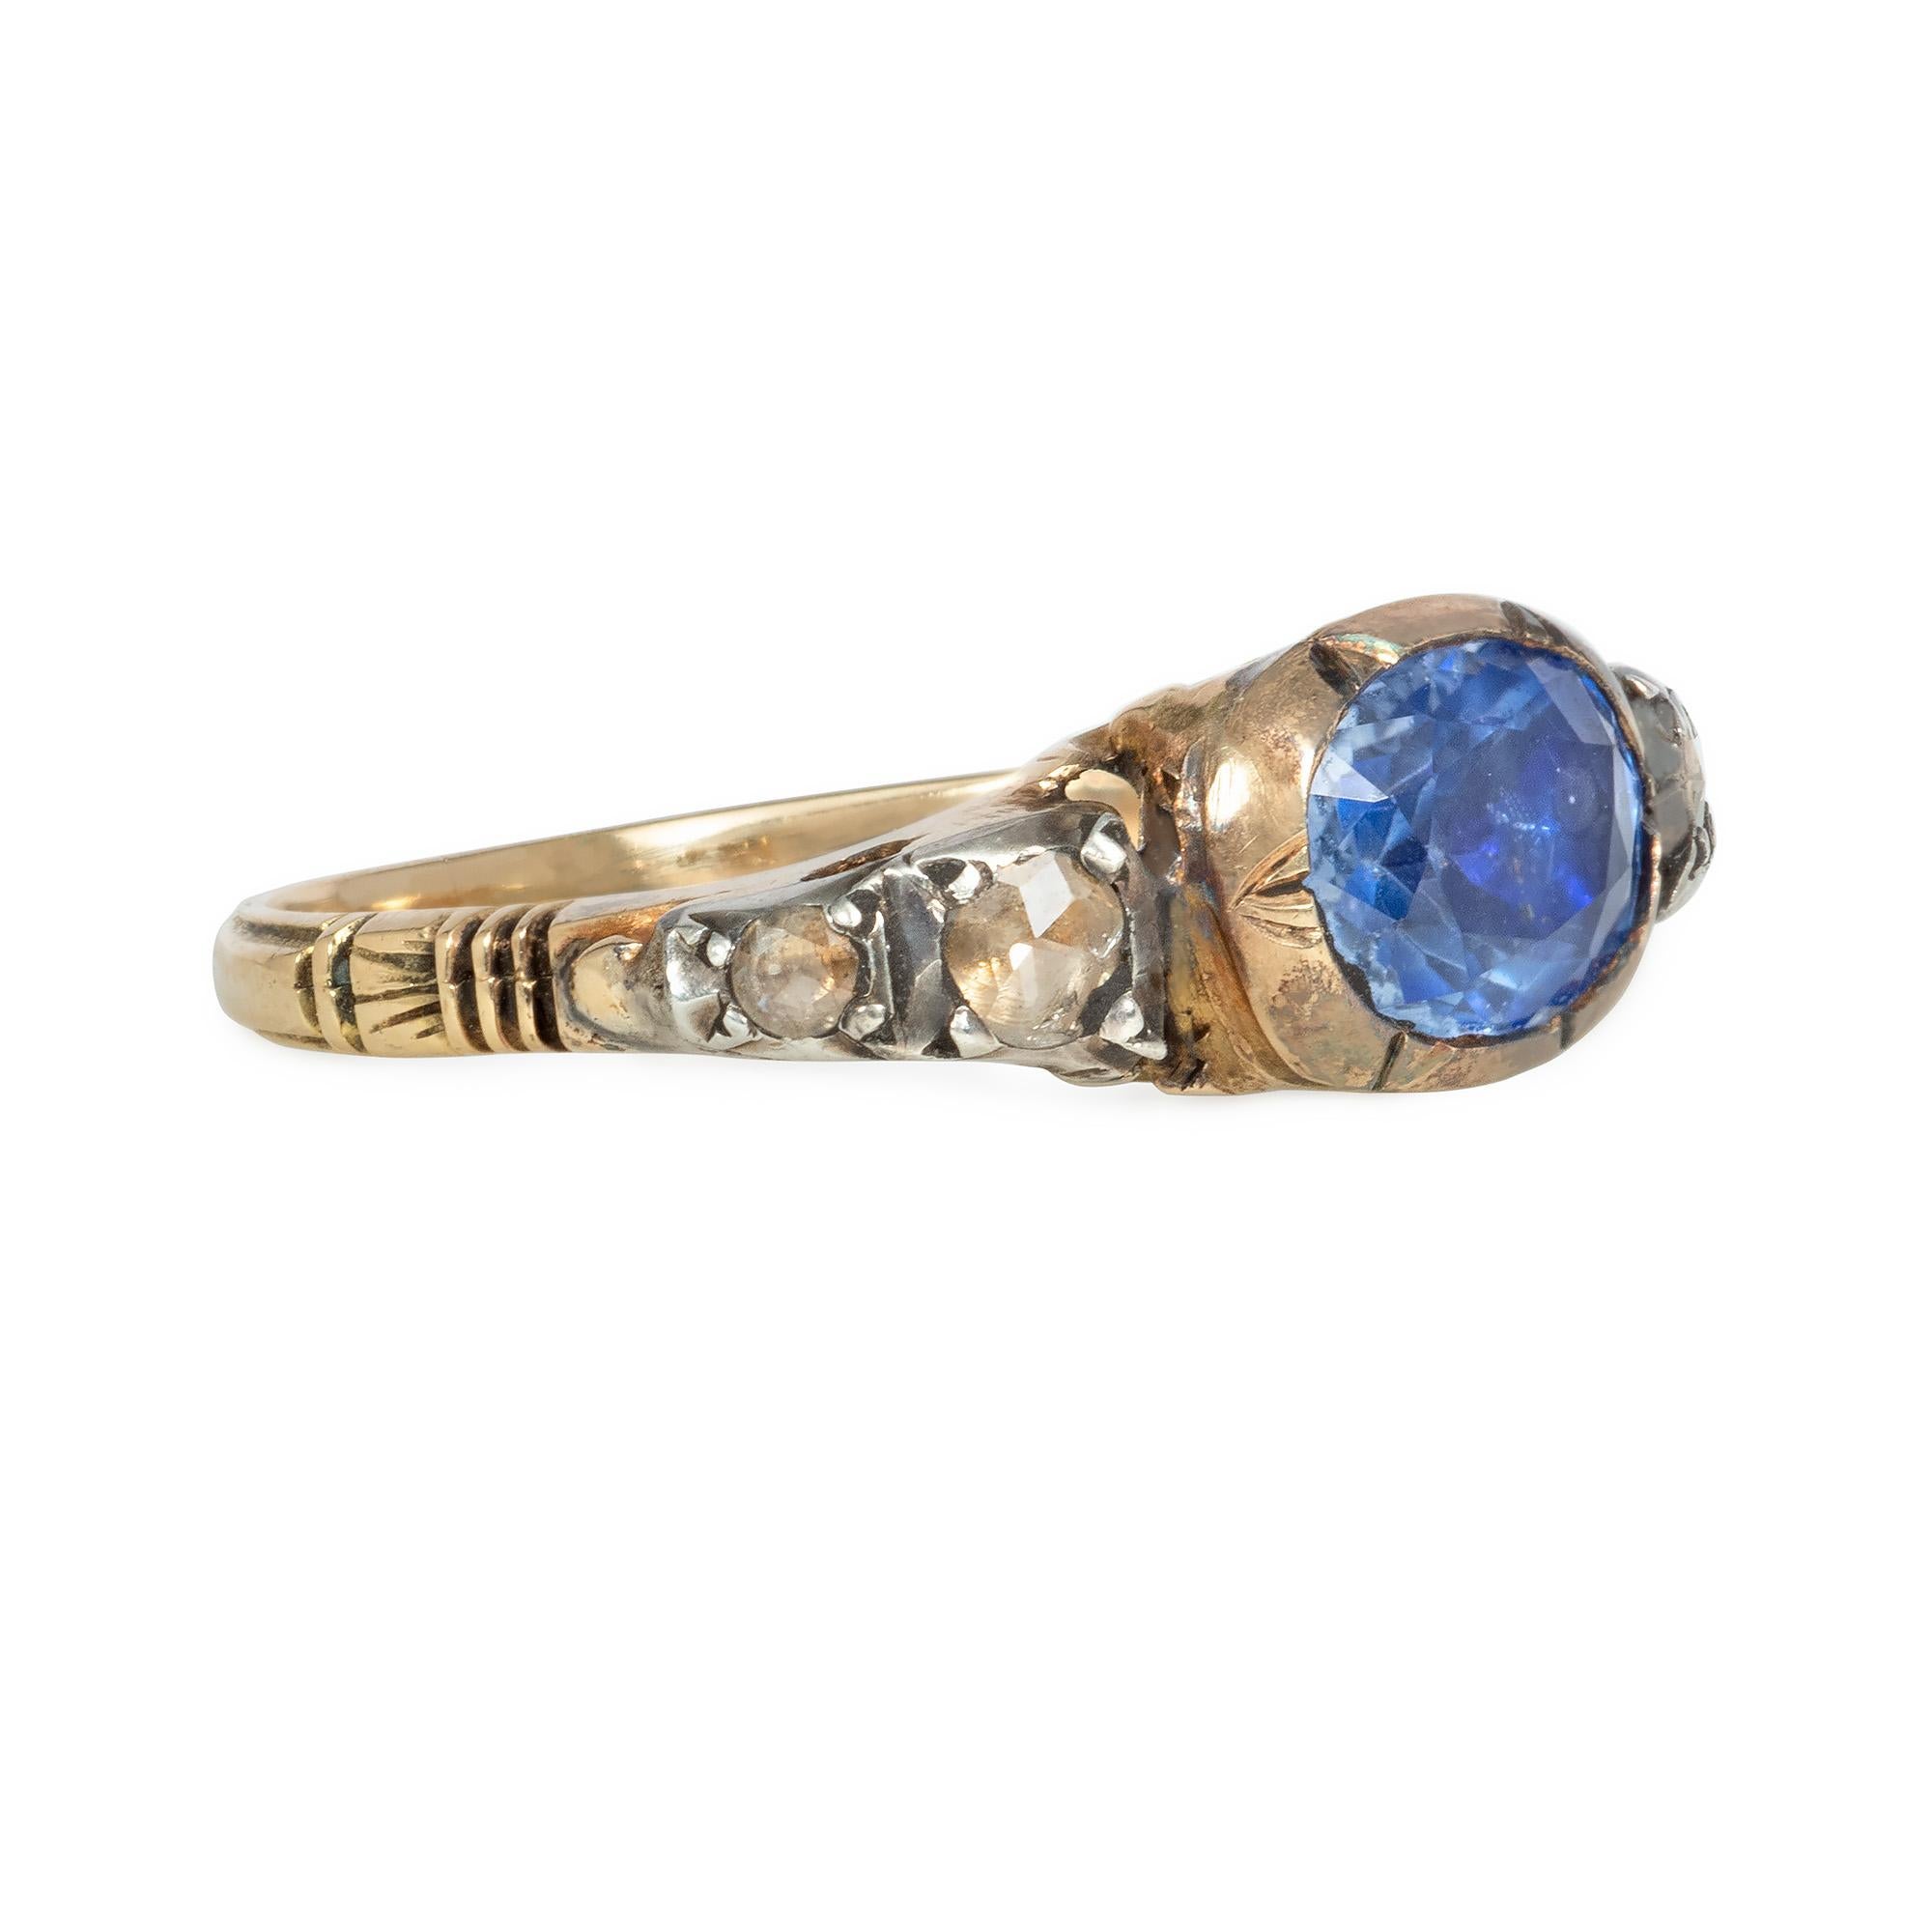 An antique Georgian period sapphire and diamond ring, the central foil-backed sapphire flanked by tapering rose-cut diamonds in a carved mounting, in sterling silver and 18k gold.

Face-up dimensions approximately 6mm x 22mm

* Includes letter of